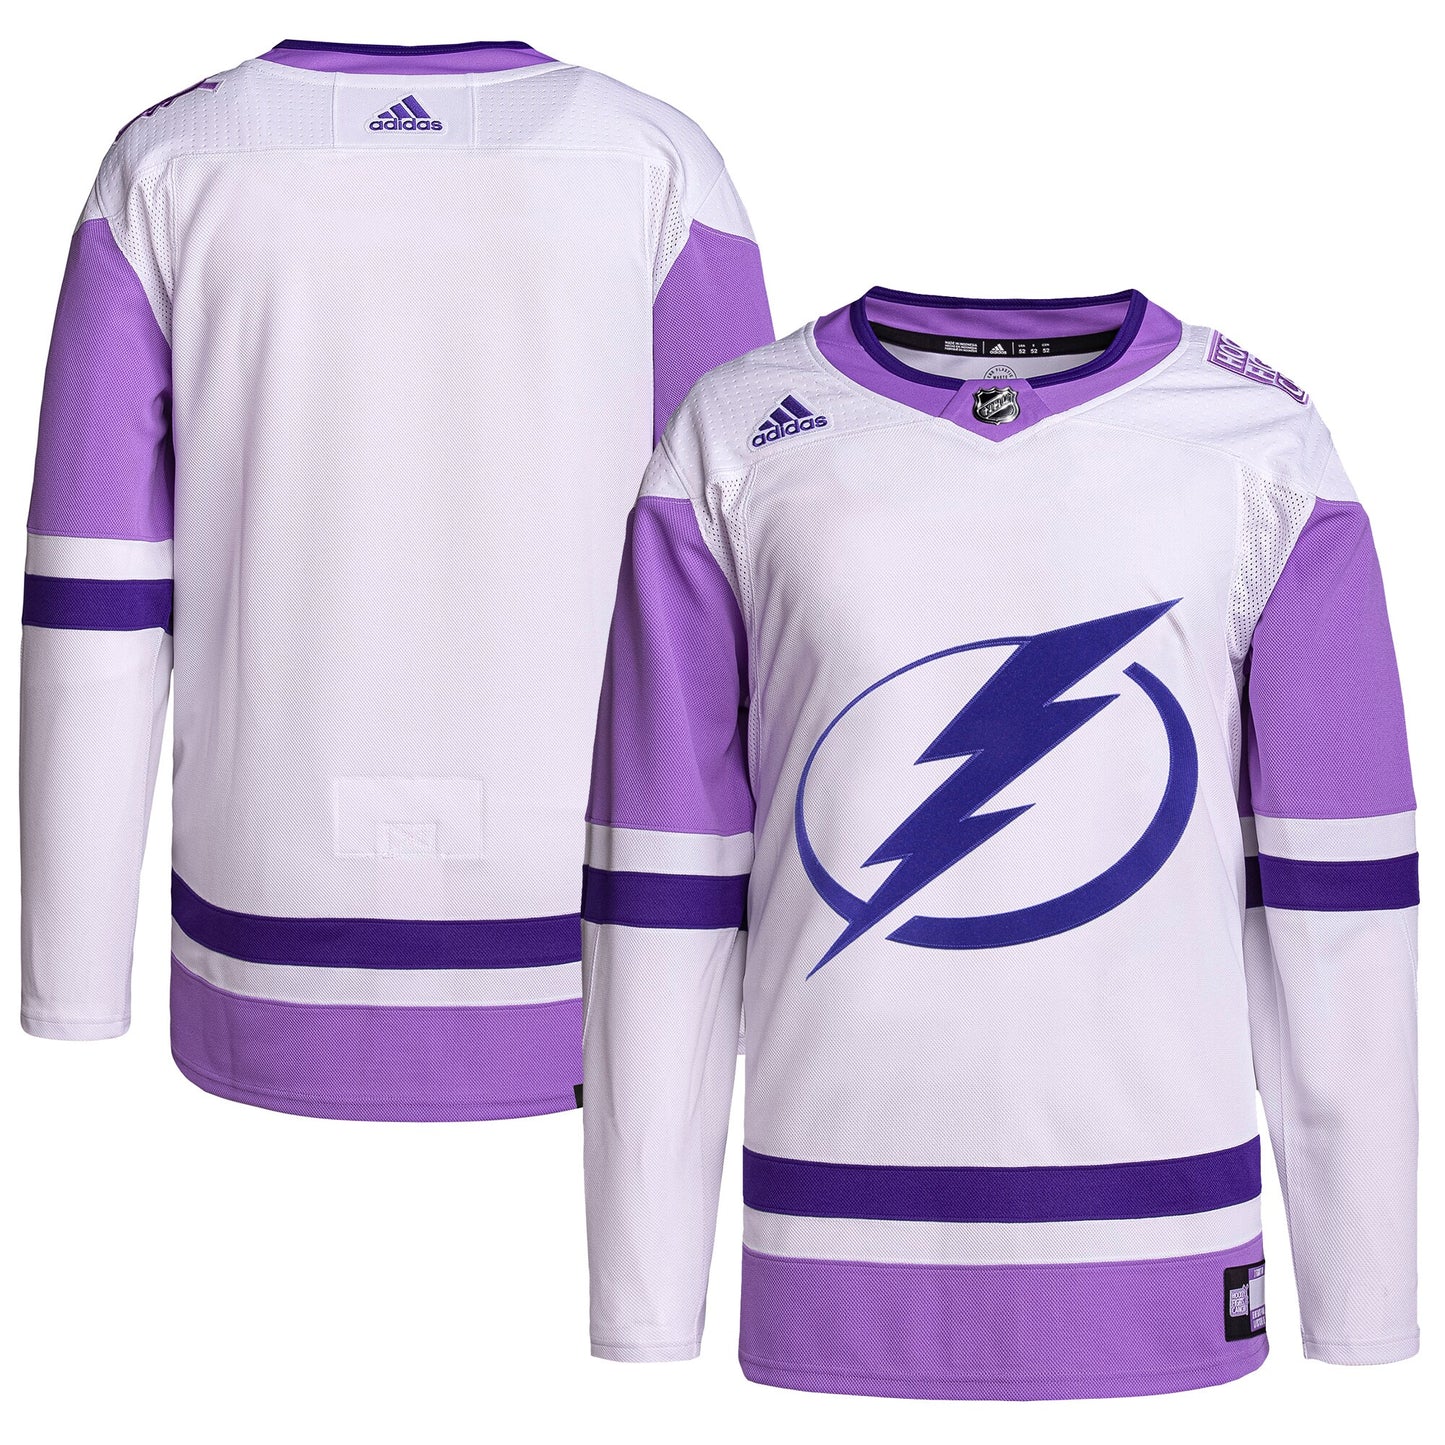 Tampa Bay Lightning adidas Hockey Fights Cancer Primegreen Authentic Blank Practice Jersey - White/Purple